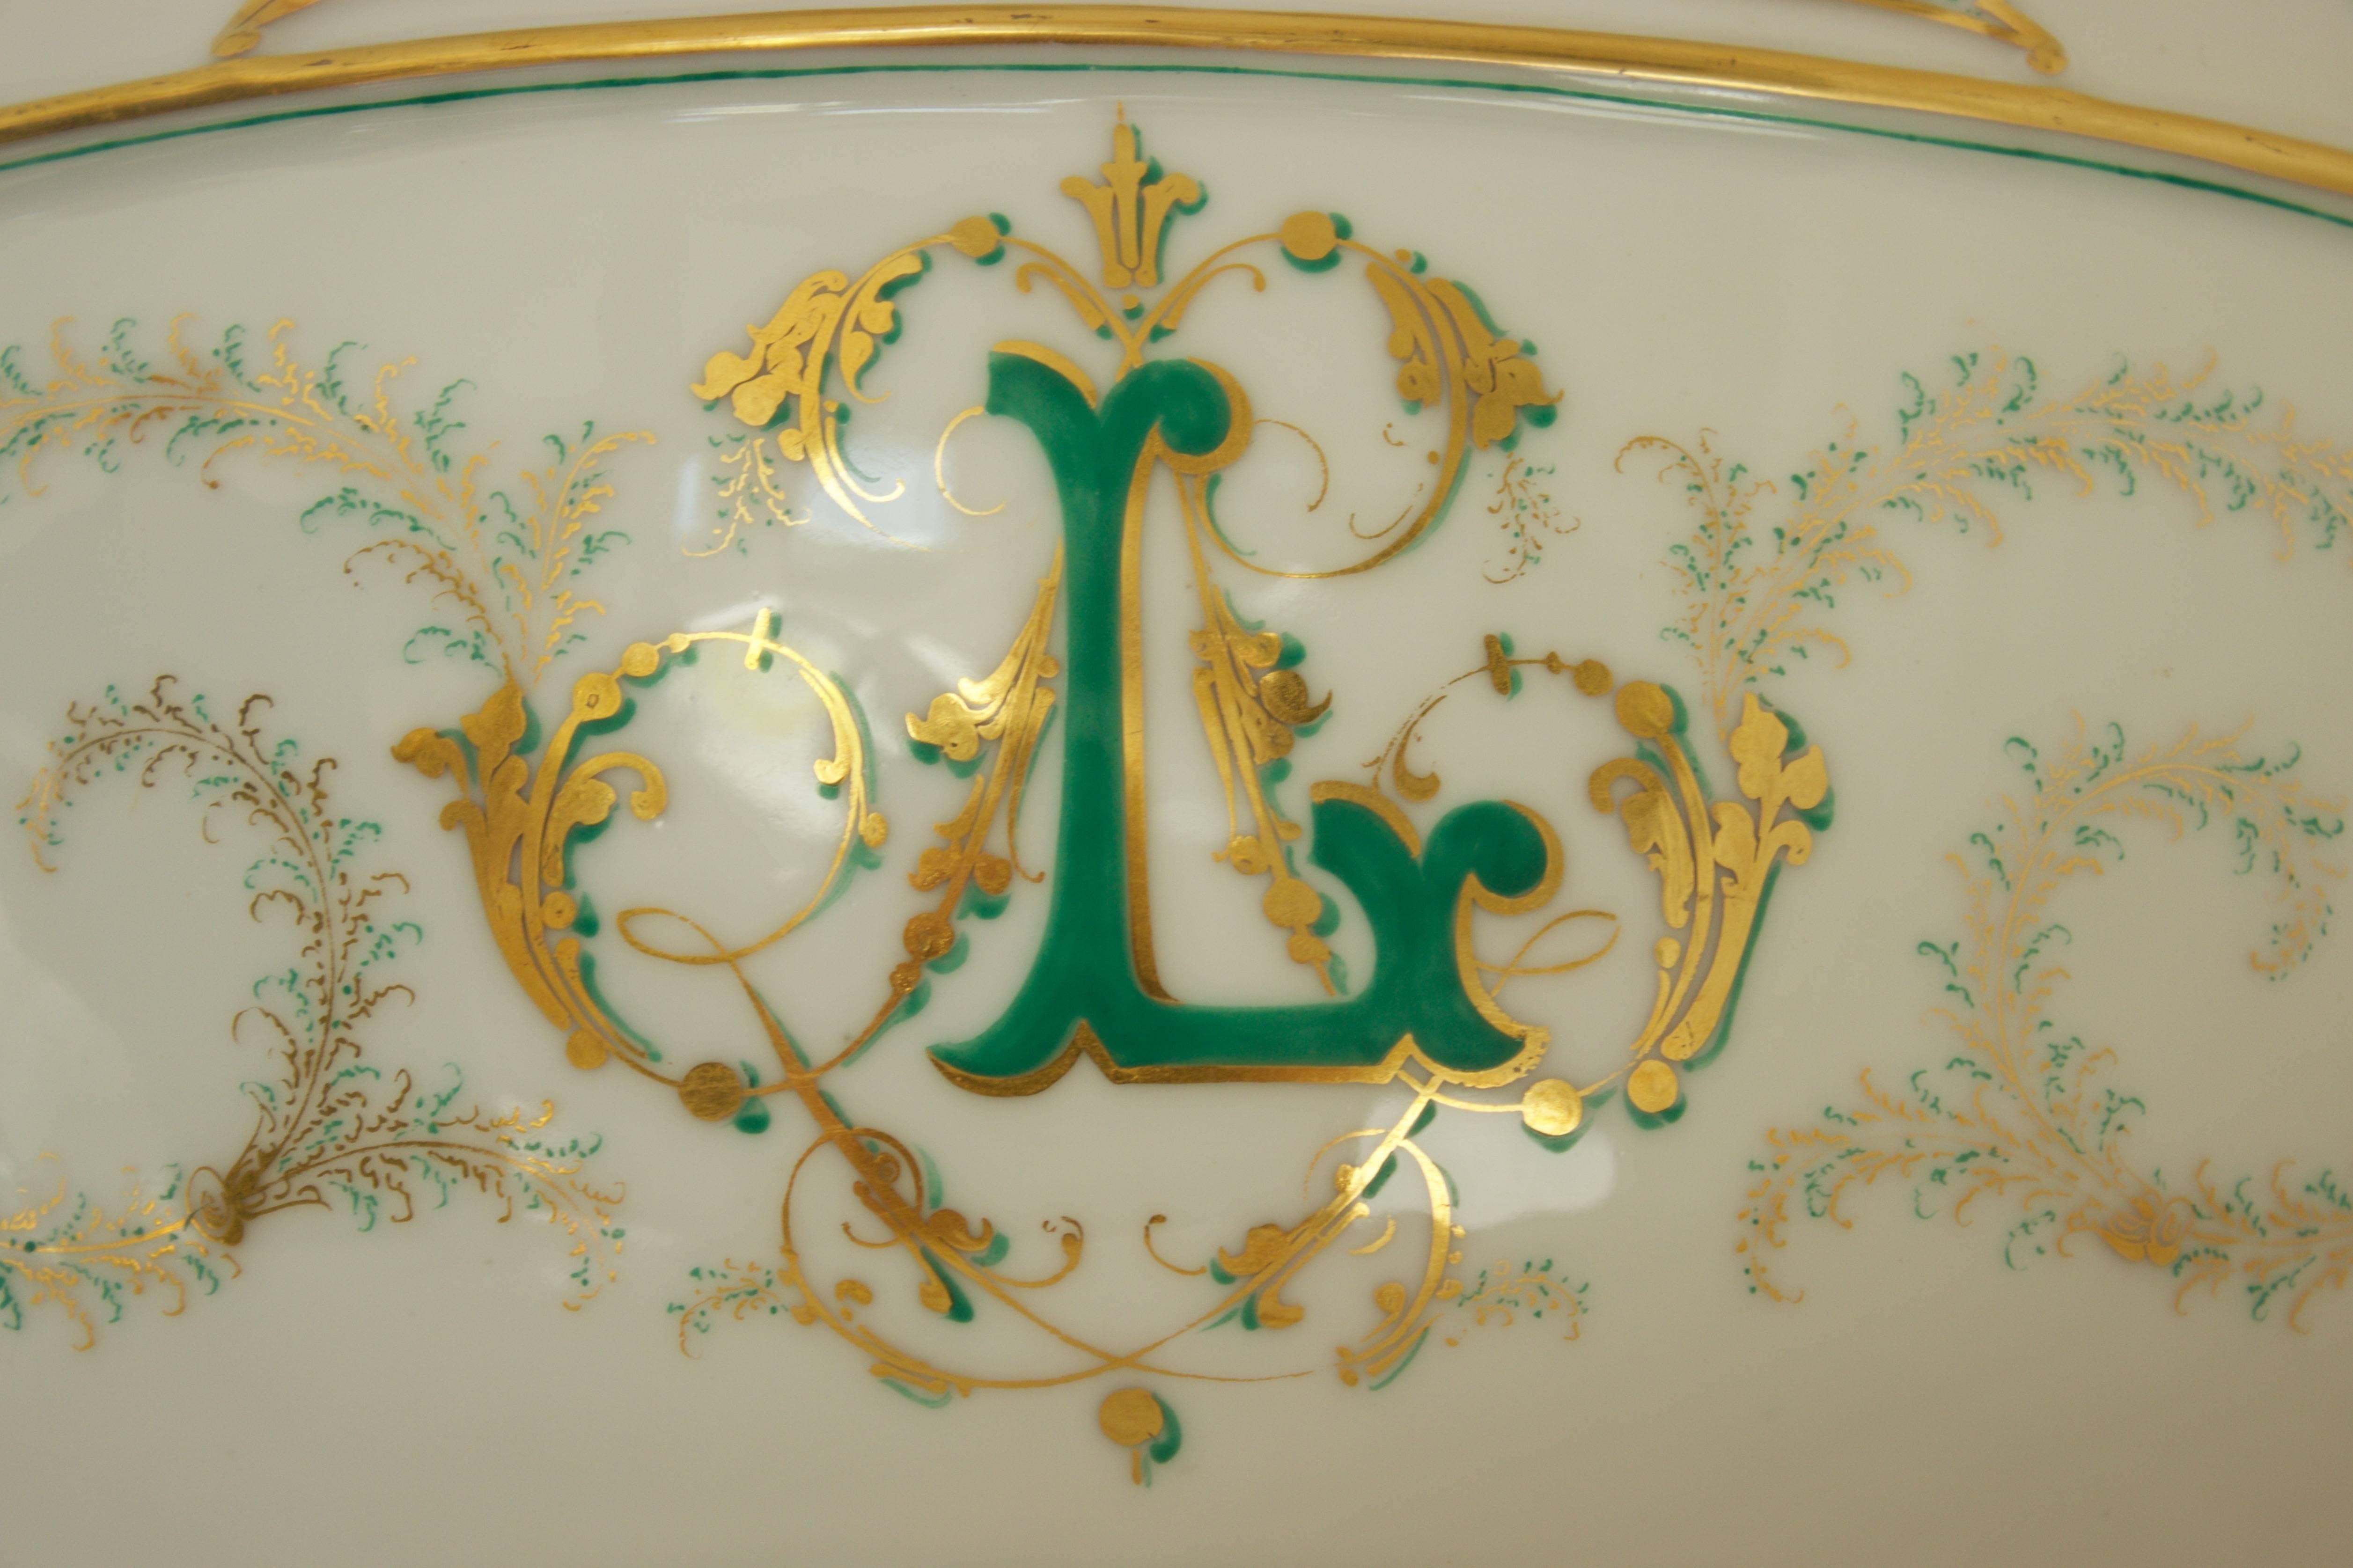 One-of-a-kind four footed center of table Jardiniere in Limoges porcelain with hand-painted scrolls in gold and greens colors. Oval shape with a sinuous top adorned by four stylized Fleur-de-Lis also present on the two handles. Double 24-carats gold